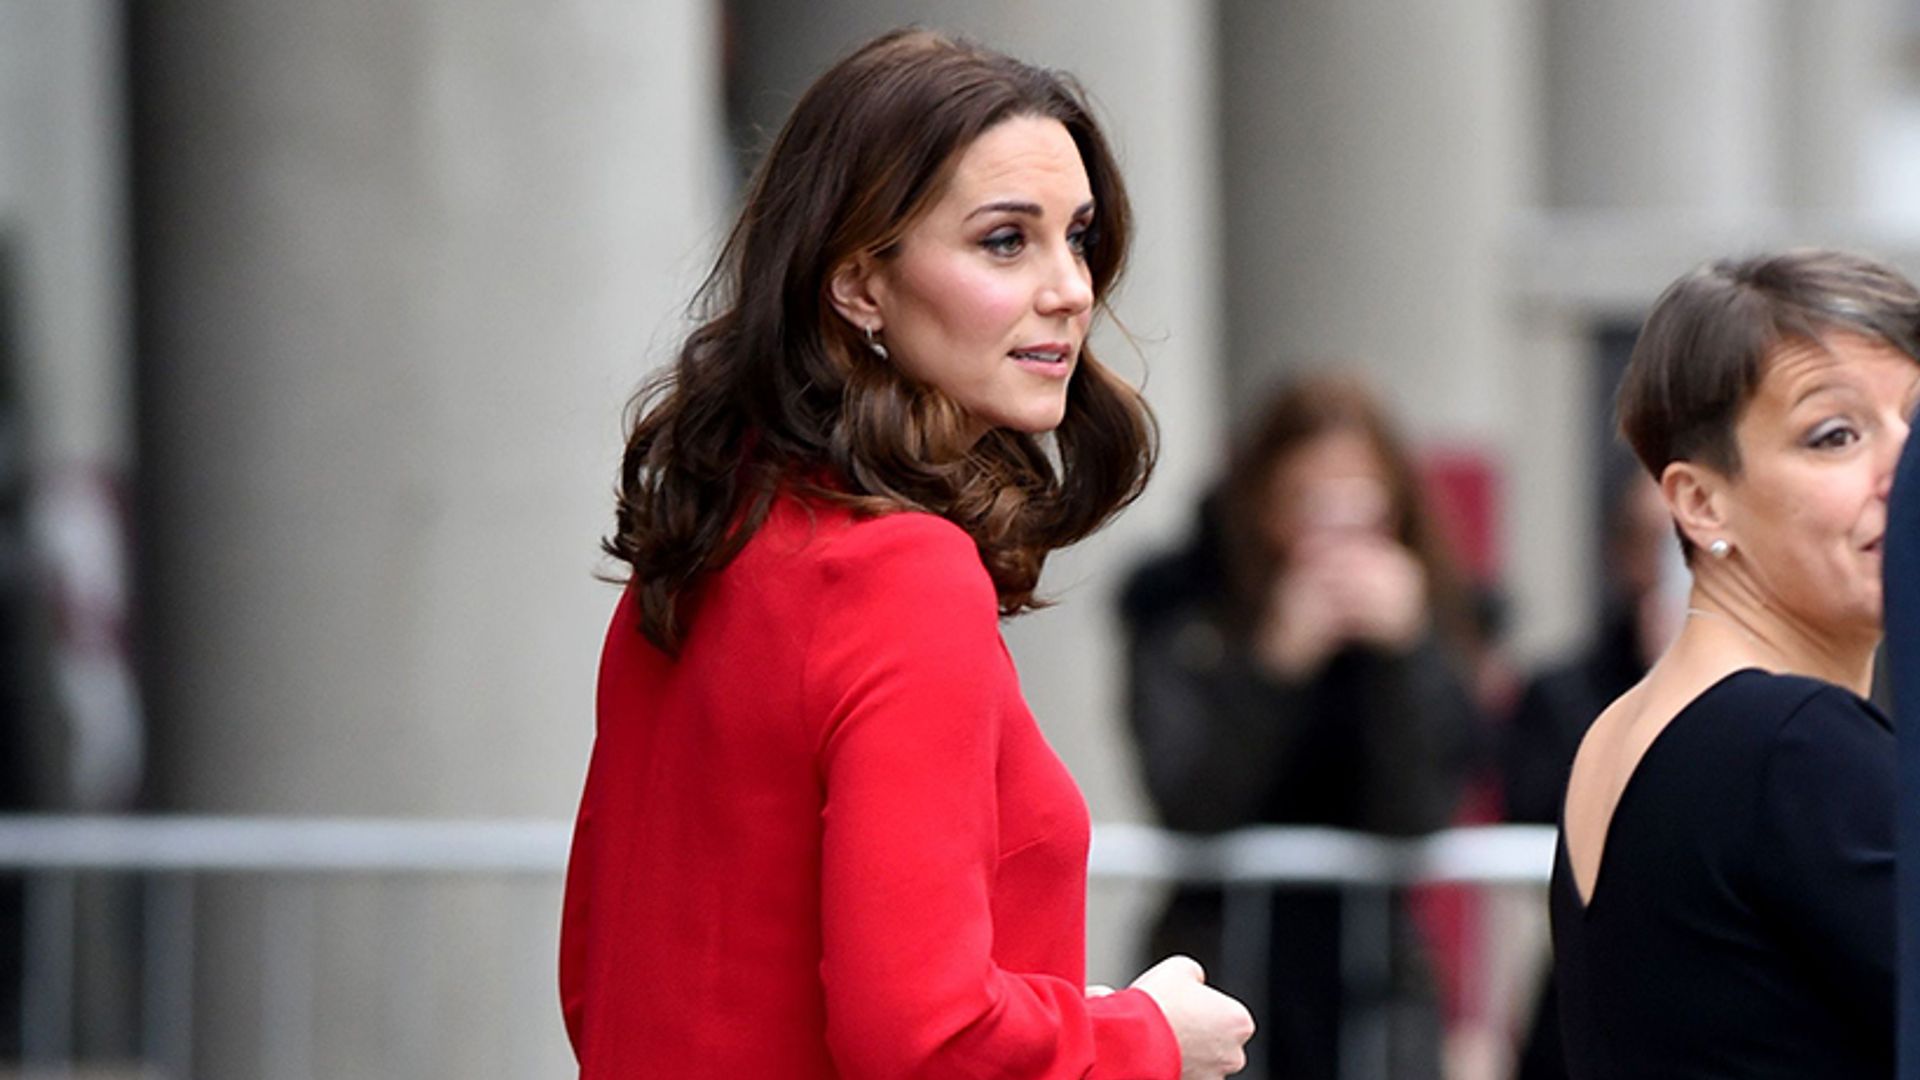 Duchess of Cambridge looks incredible in red dress by Goat